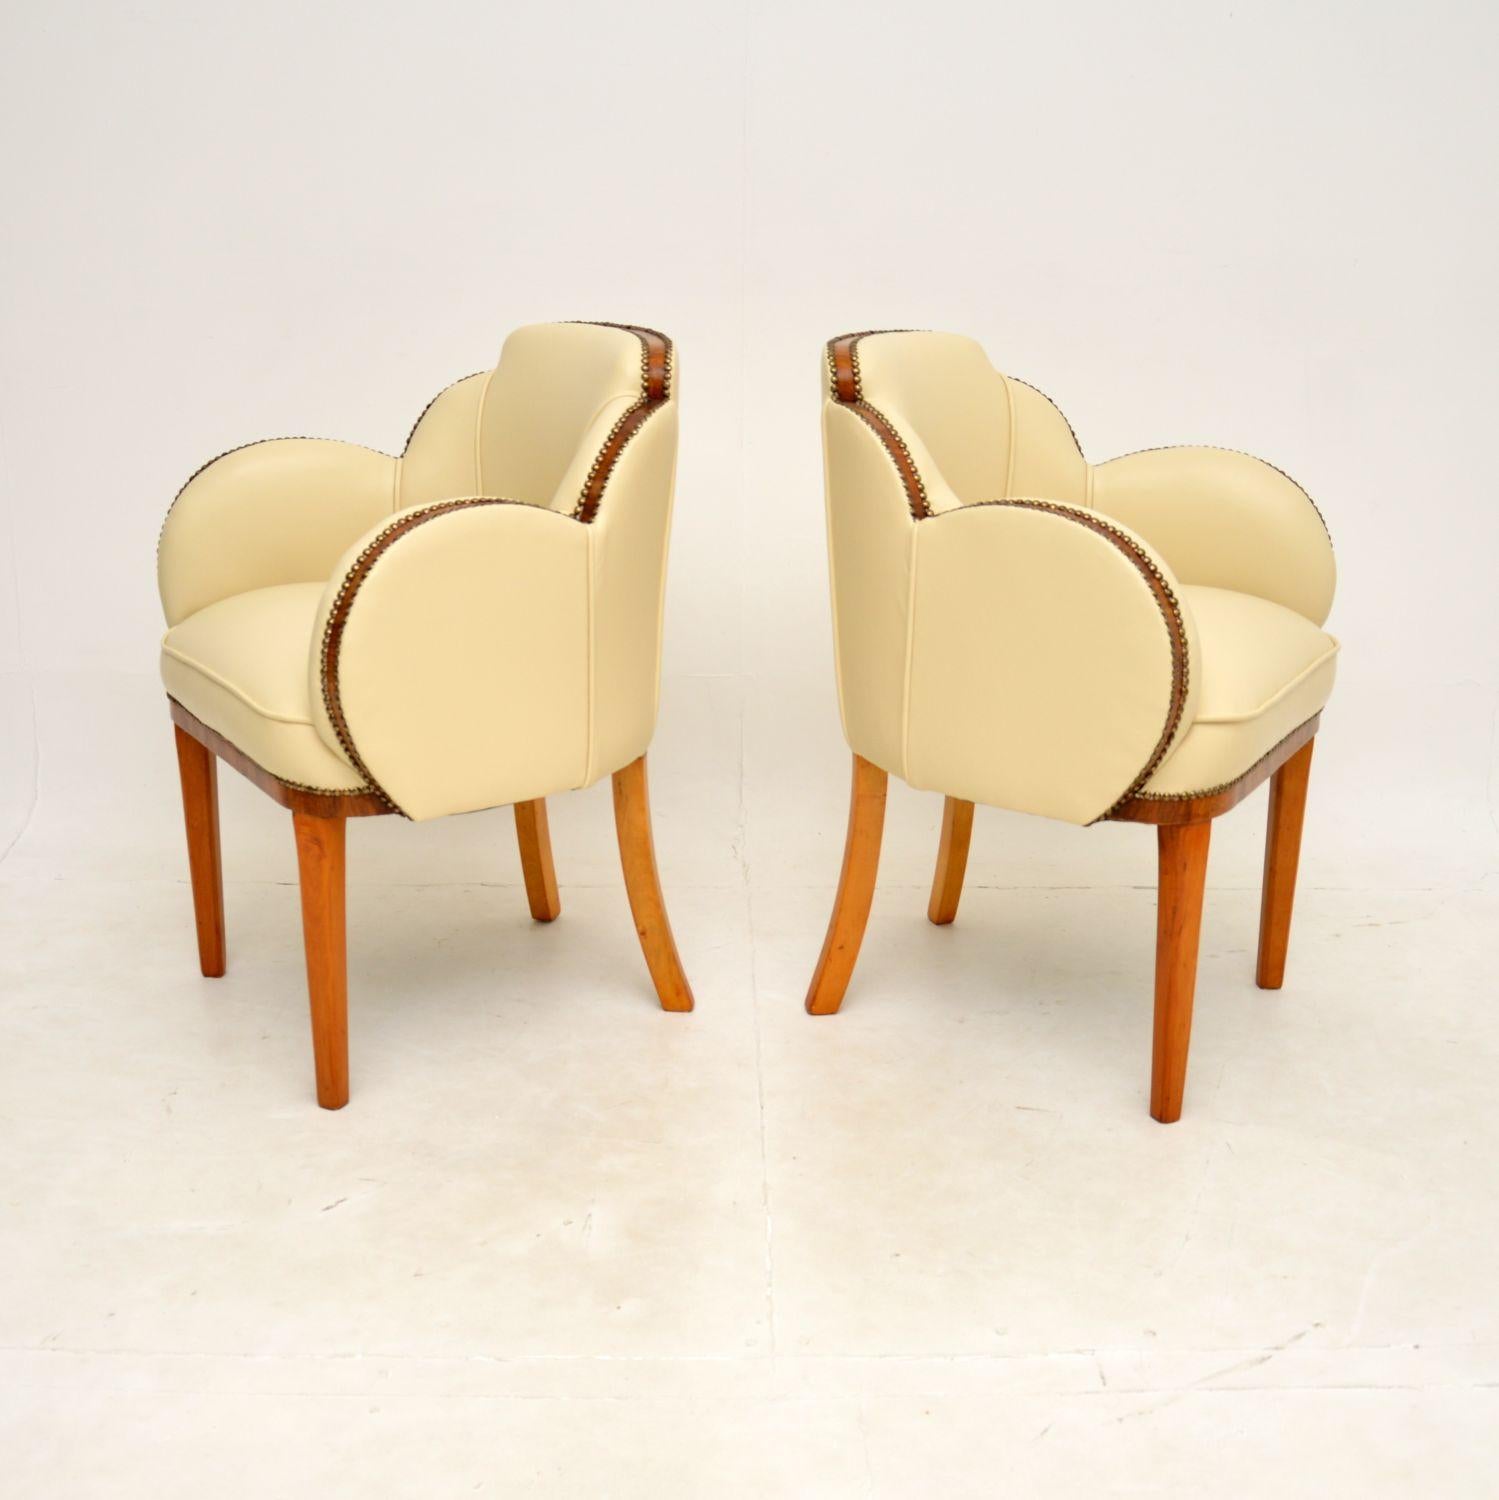 British Pair of Art Deco Walnut and Leather Cloud Back Armchairs by Epstein